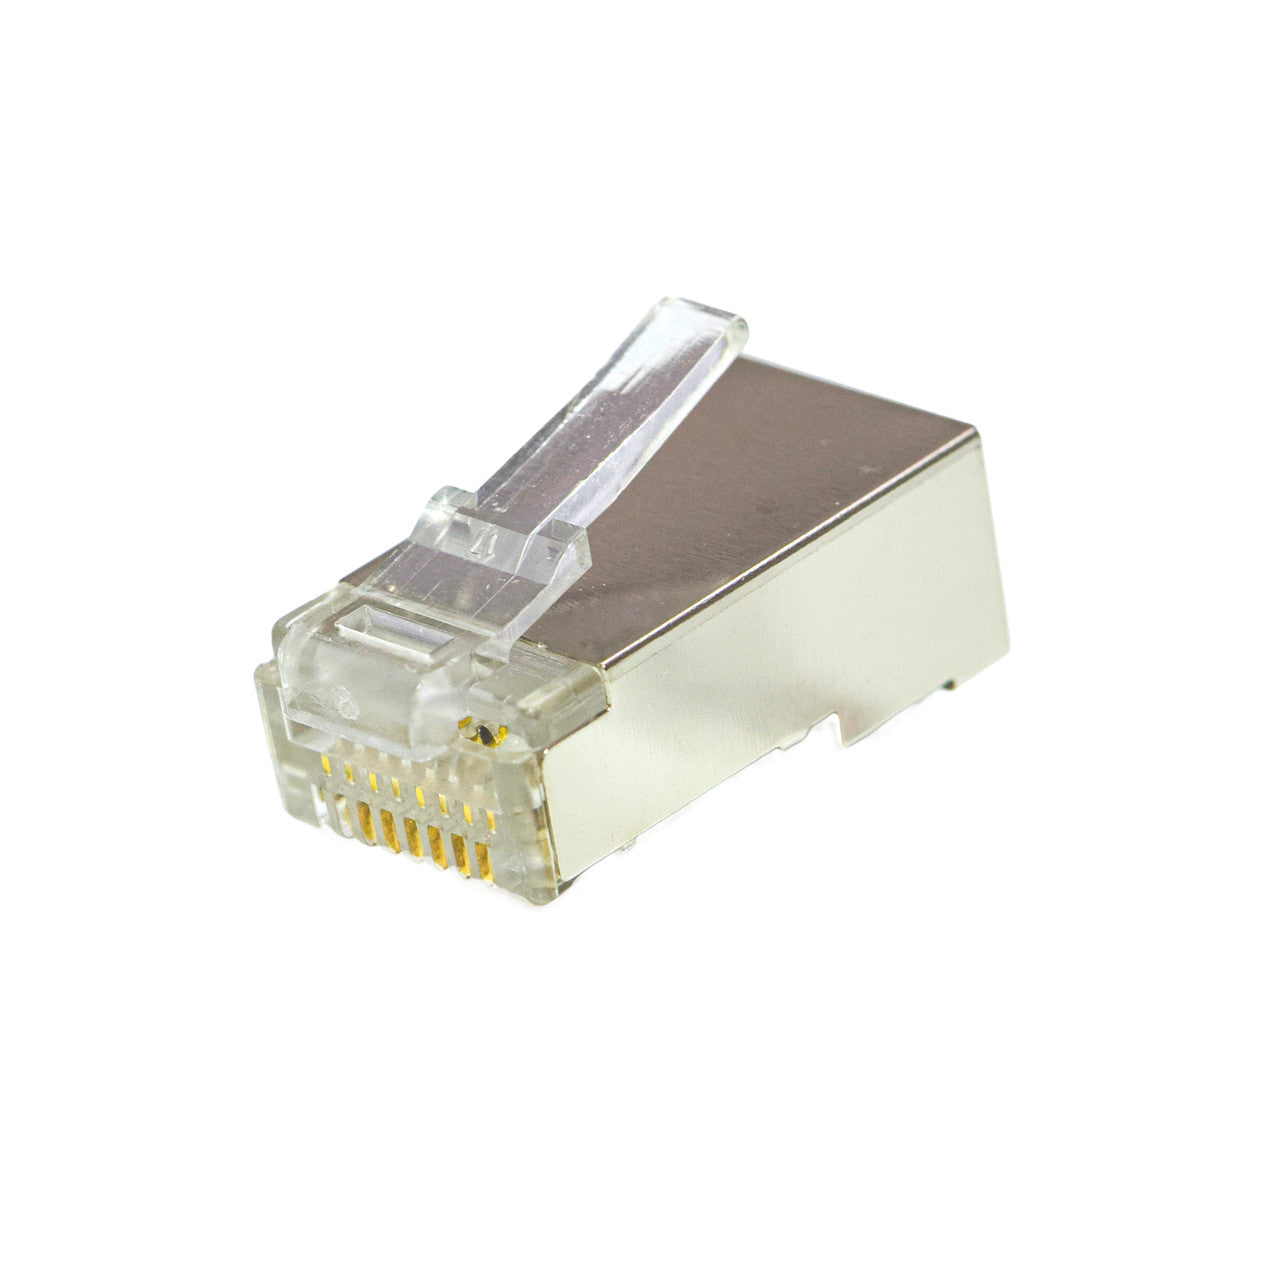 Category 6 Shielded RJ45 Modular Plug with Loading Bar for Solid Cable